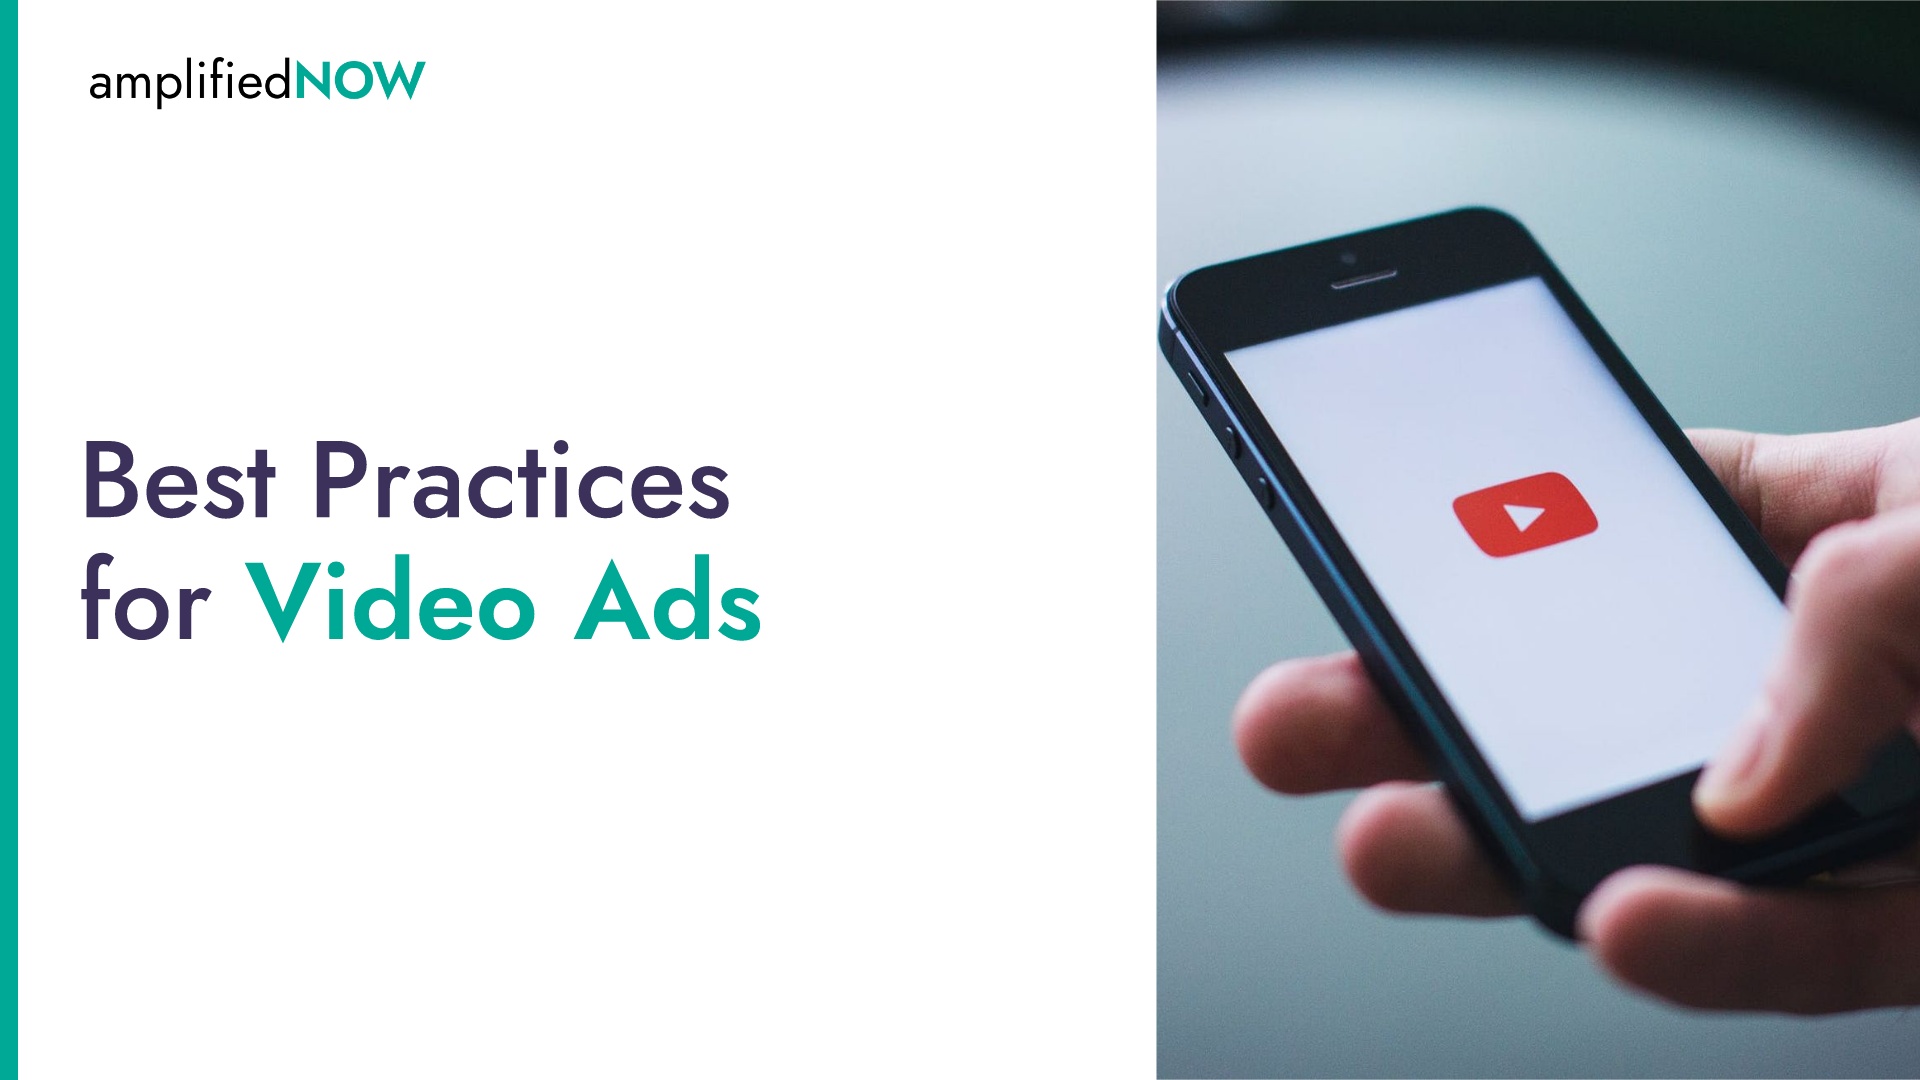 Best Practices for Video Ads